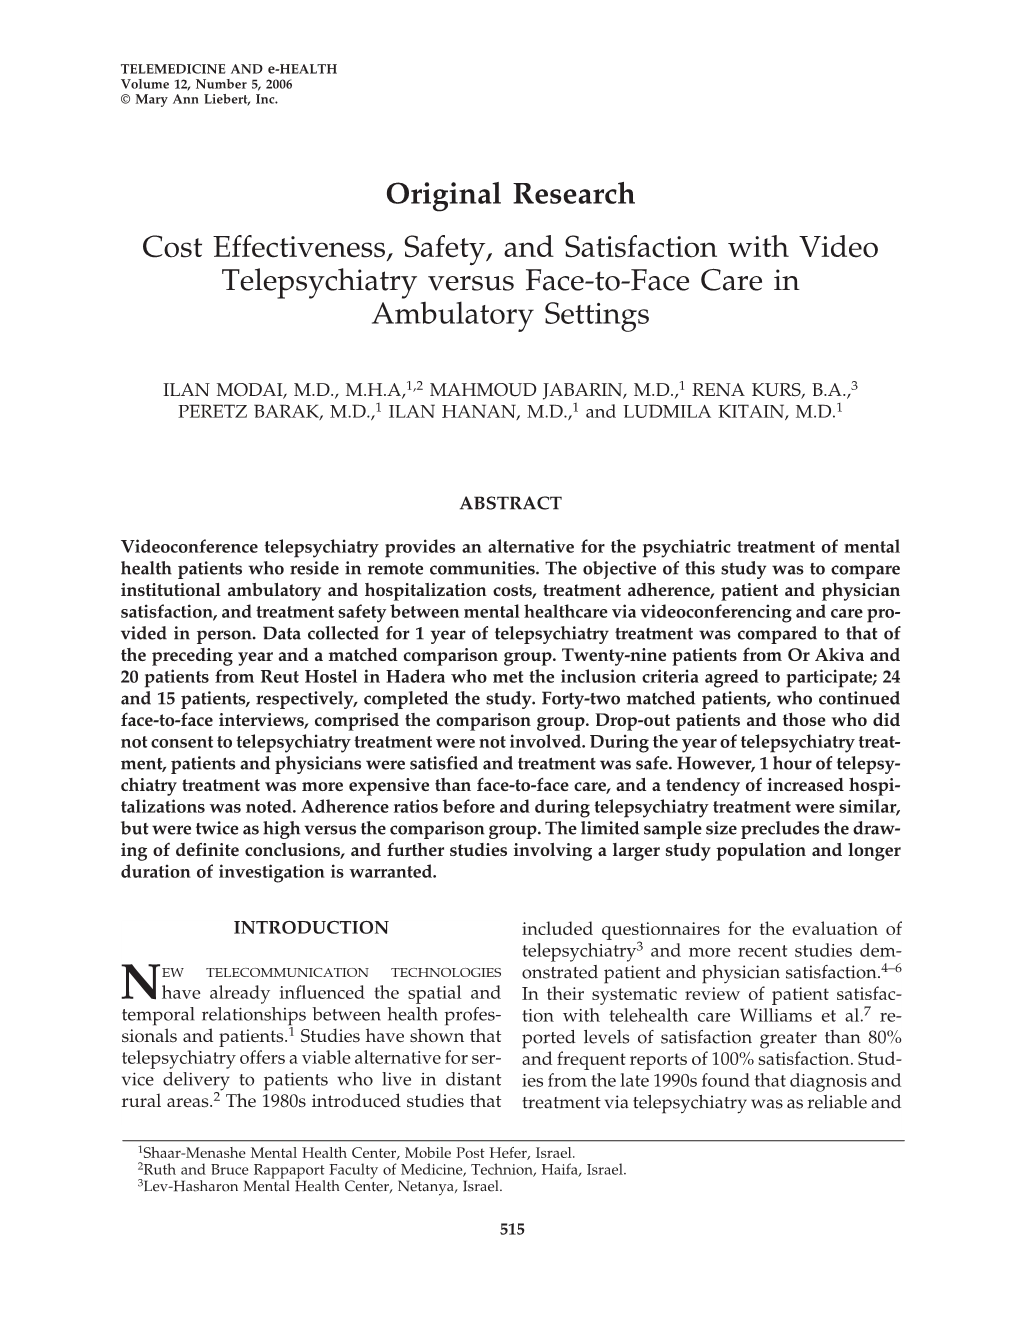 Original Research Cost Effectiveness, Safety, and Satisfaction with Video Telepsychiatry Versus Face-To-Face Care in Ambulatory Settings